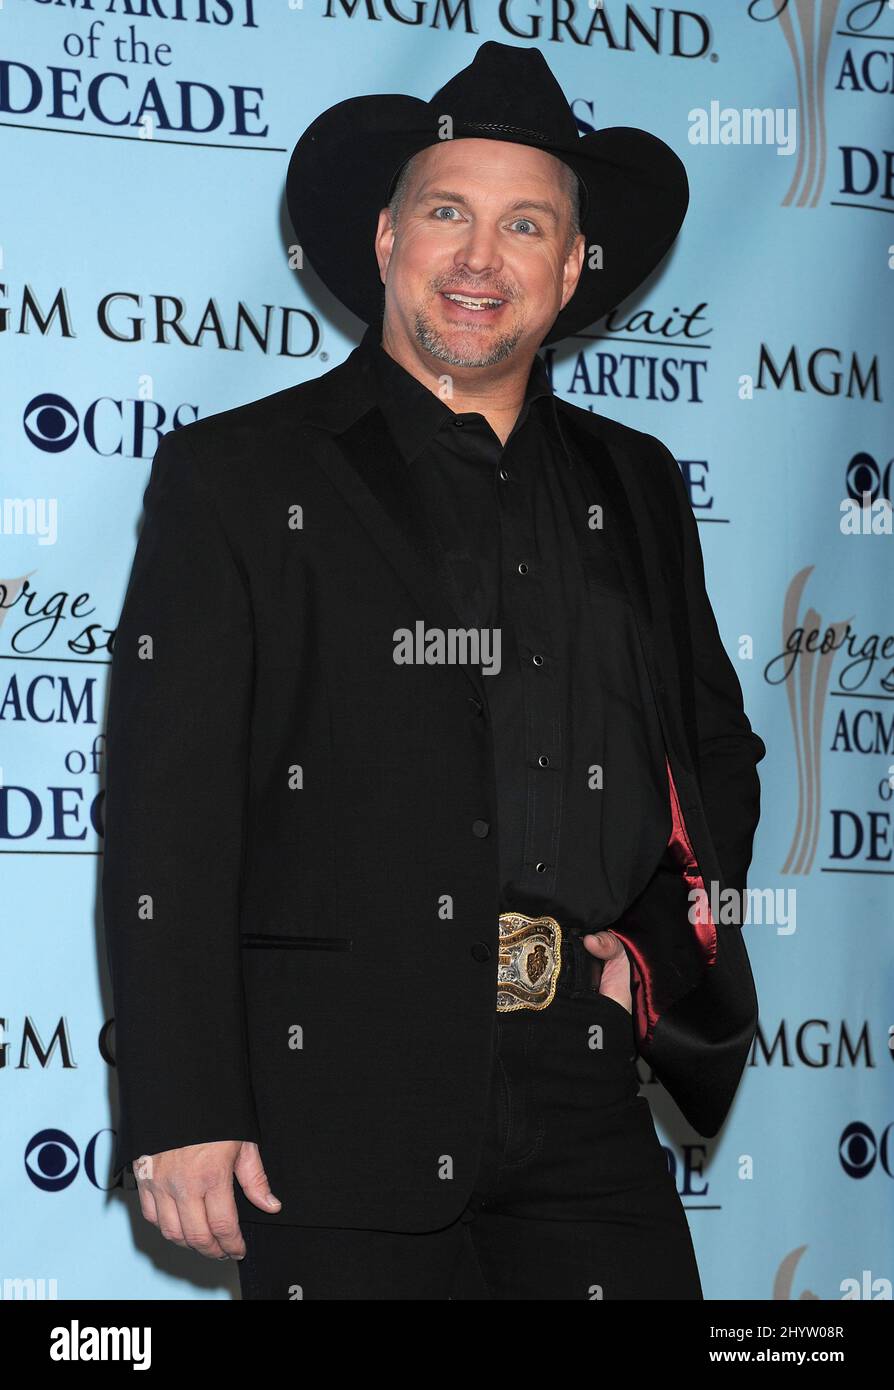 Garth Brooks At The George Strait Acm Artist Of The Decade All Star Concert Held At The Mgm